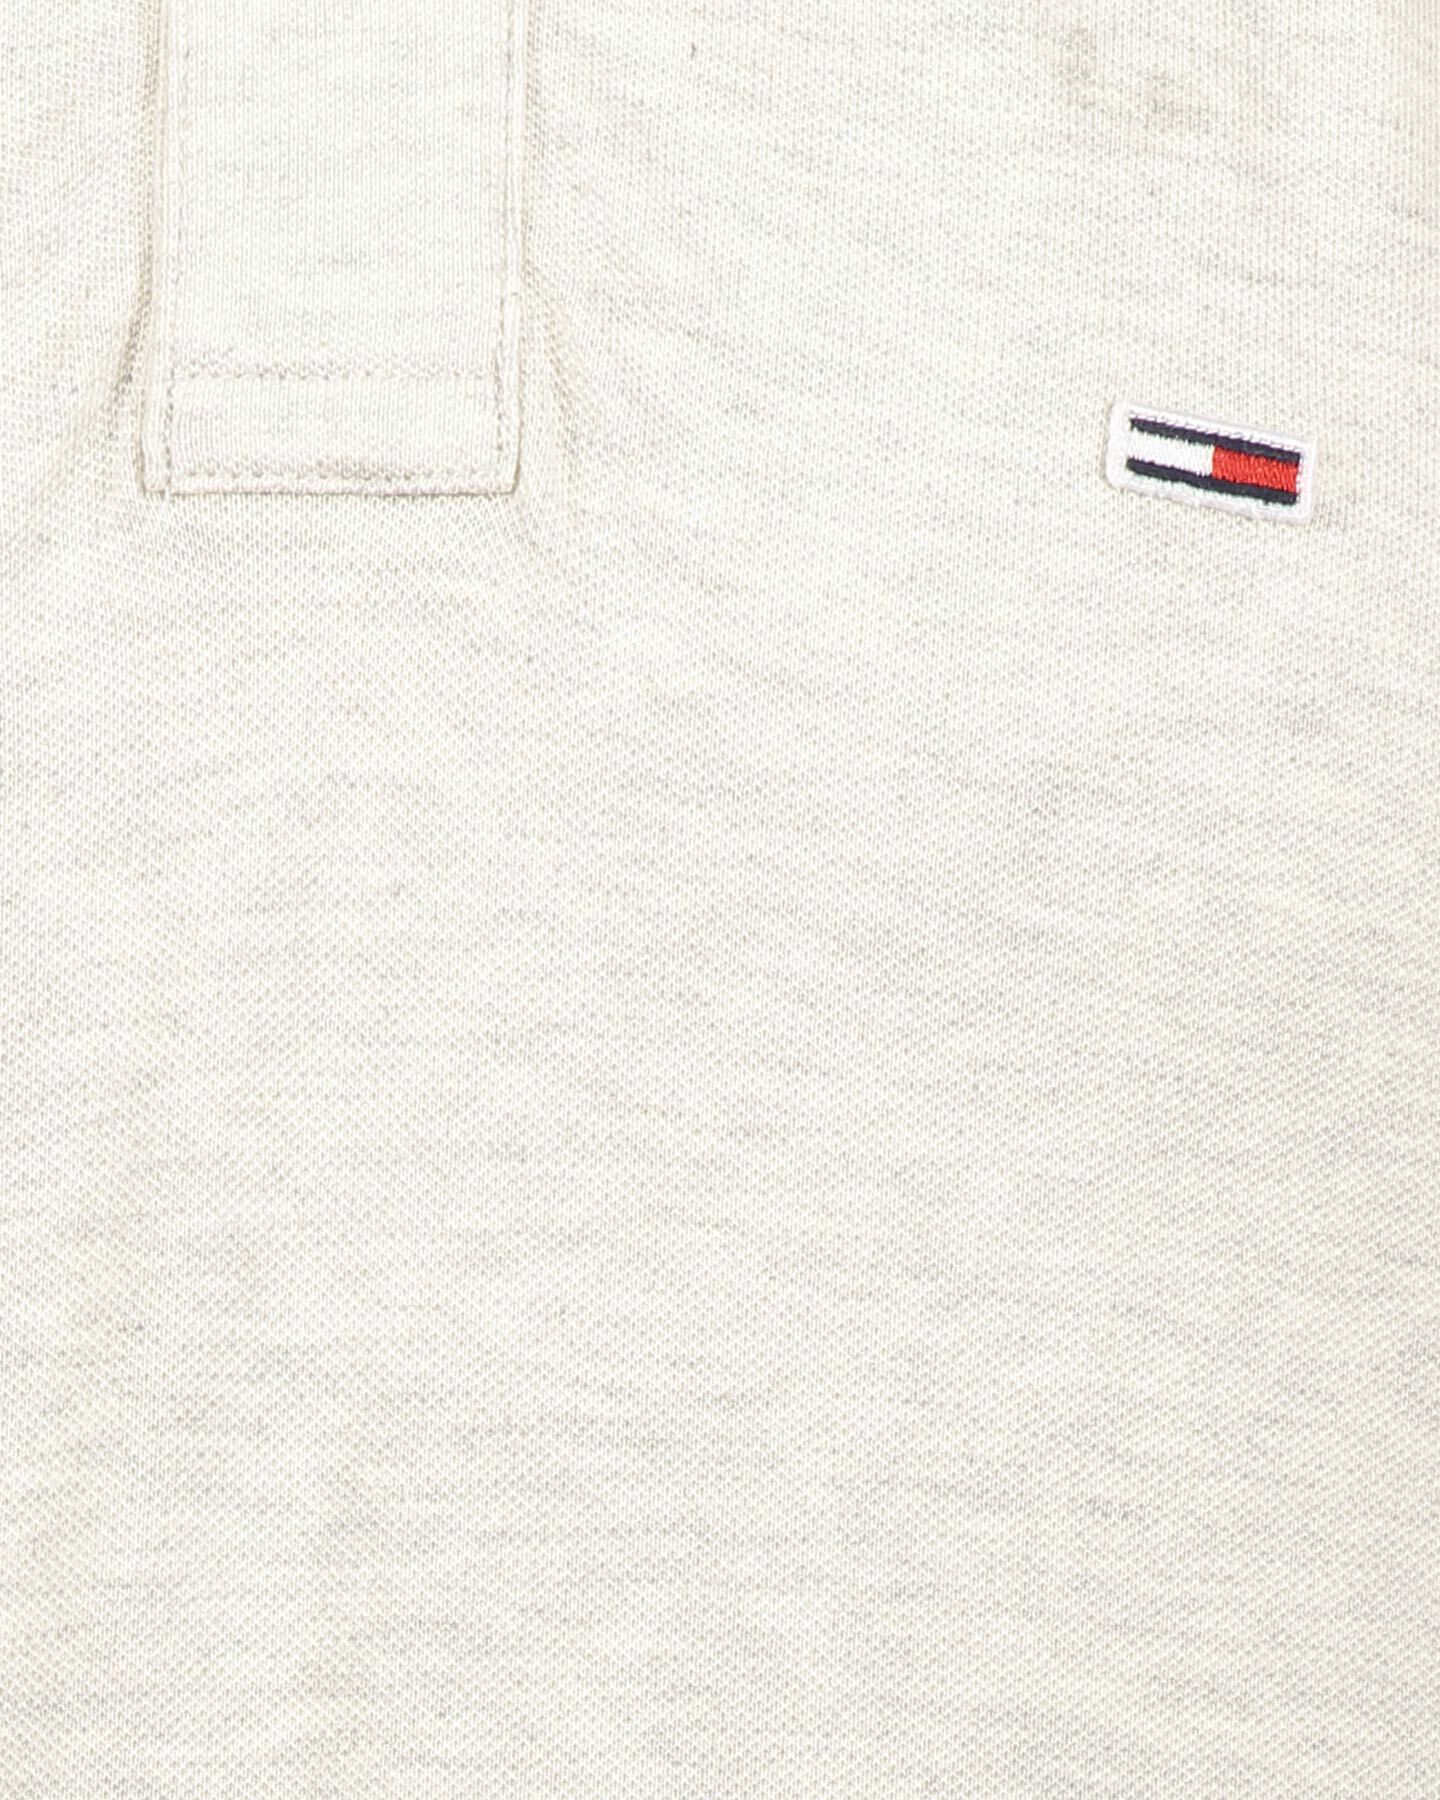  Polo TOMMY HILFIGER PATCH FLAG M S4076862|PPP|S scatto 2